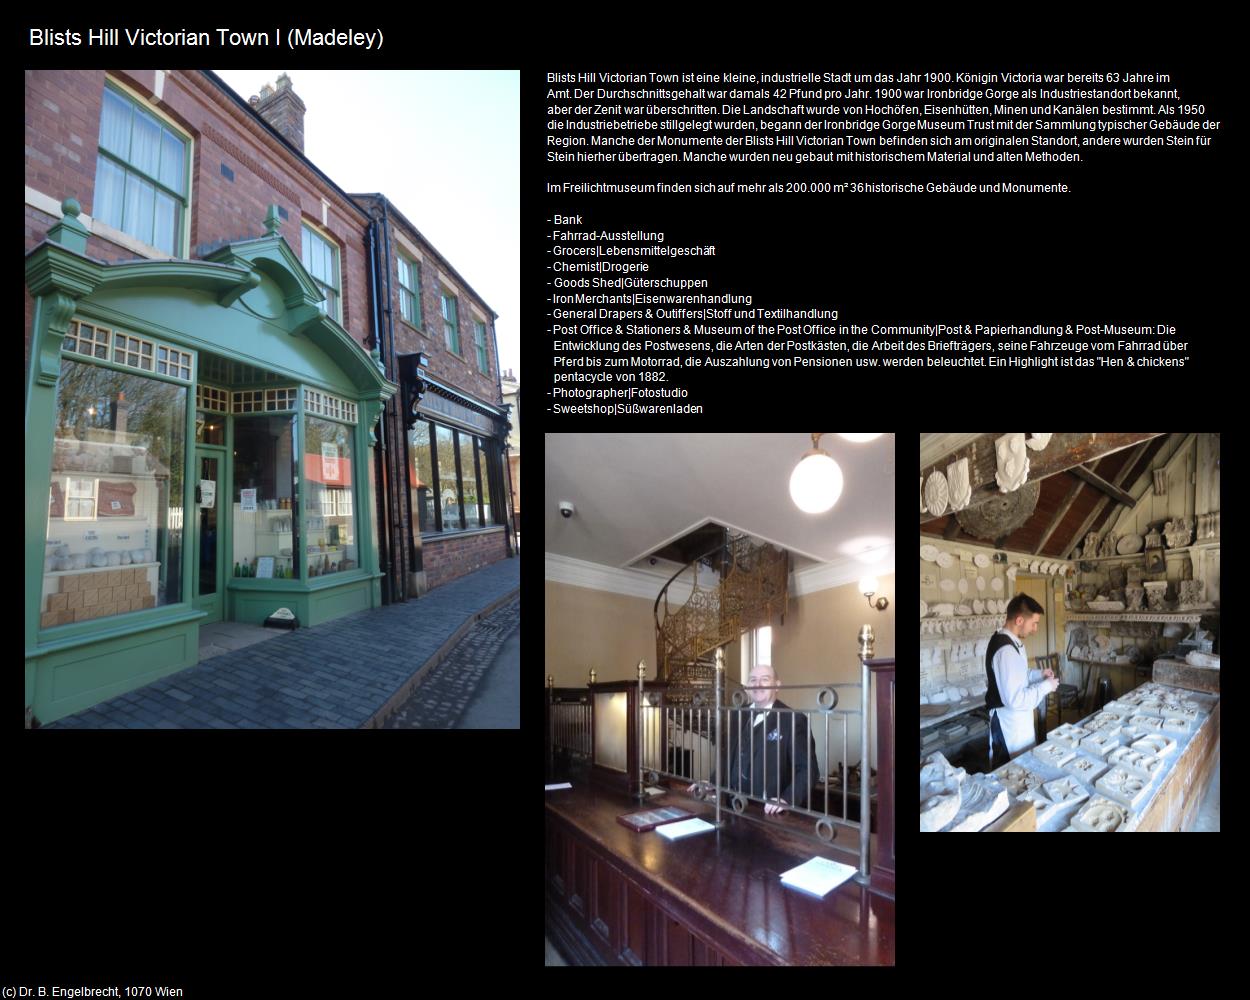 Blists Hill Victorian Town I (Madeley, England) in Kulturatlas-ENGLAND und WALES